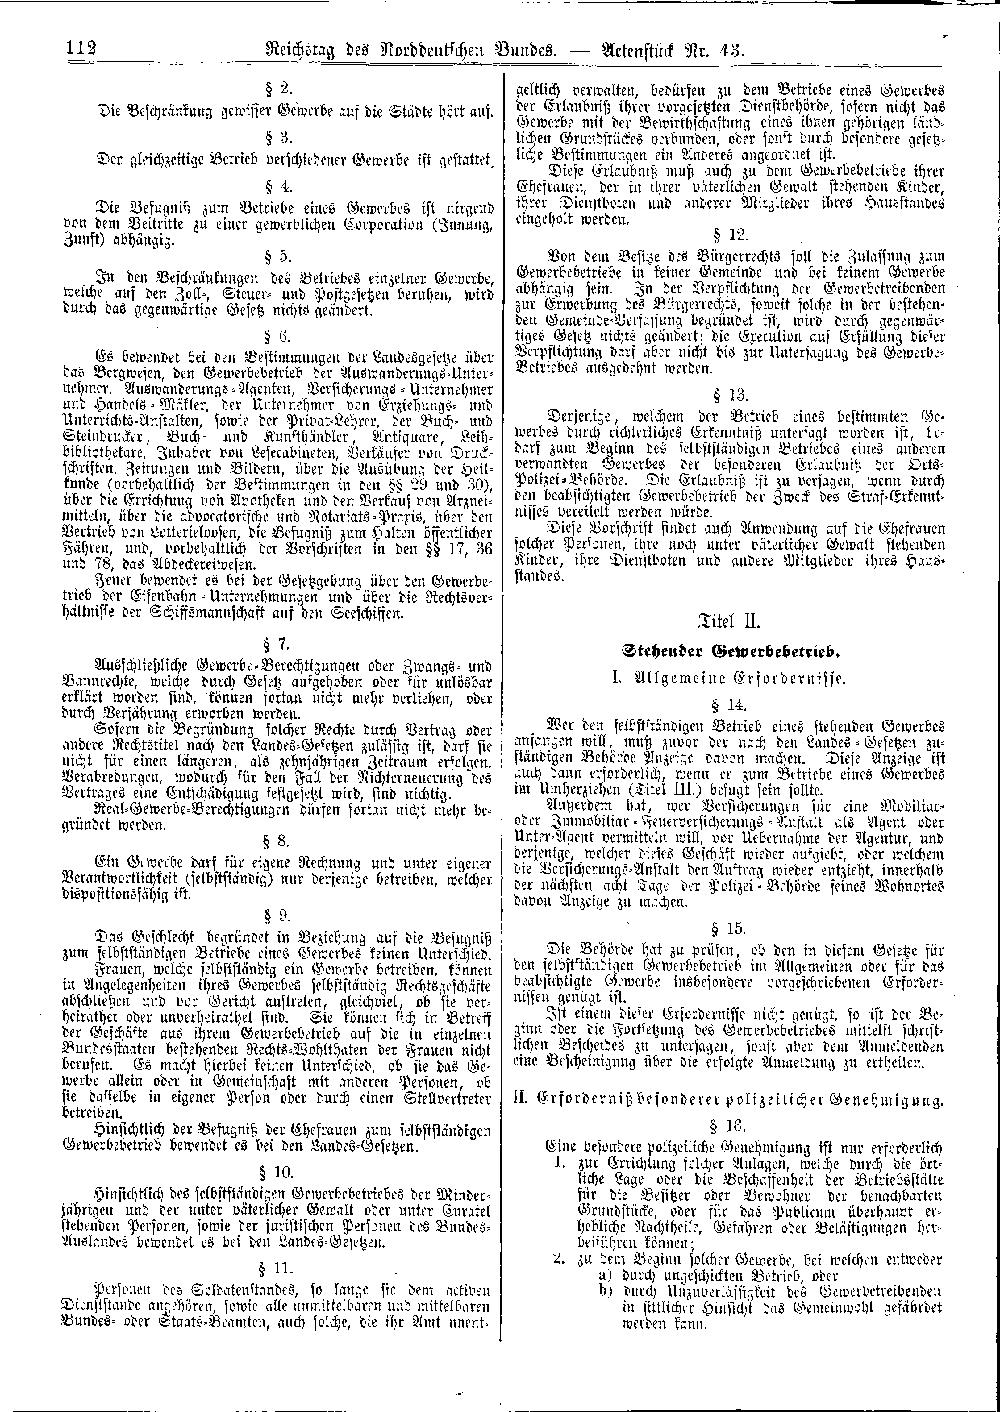 Scan of page 112